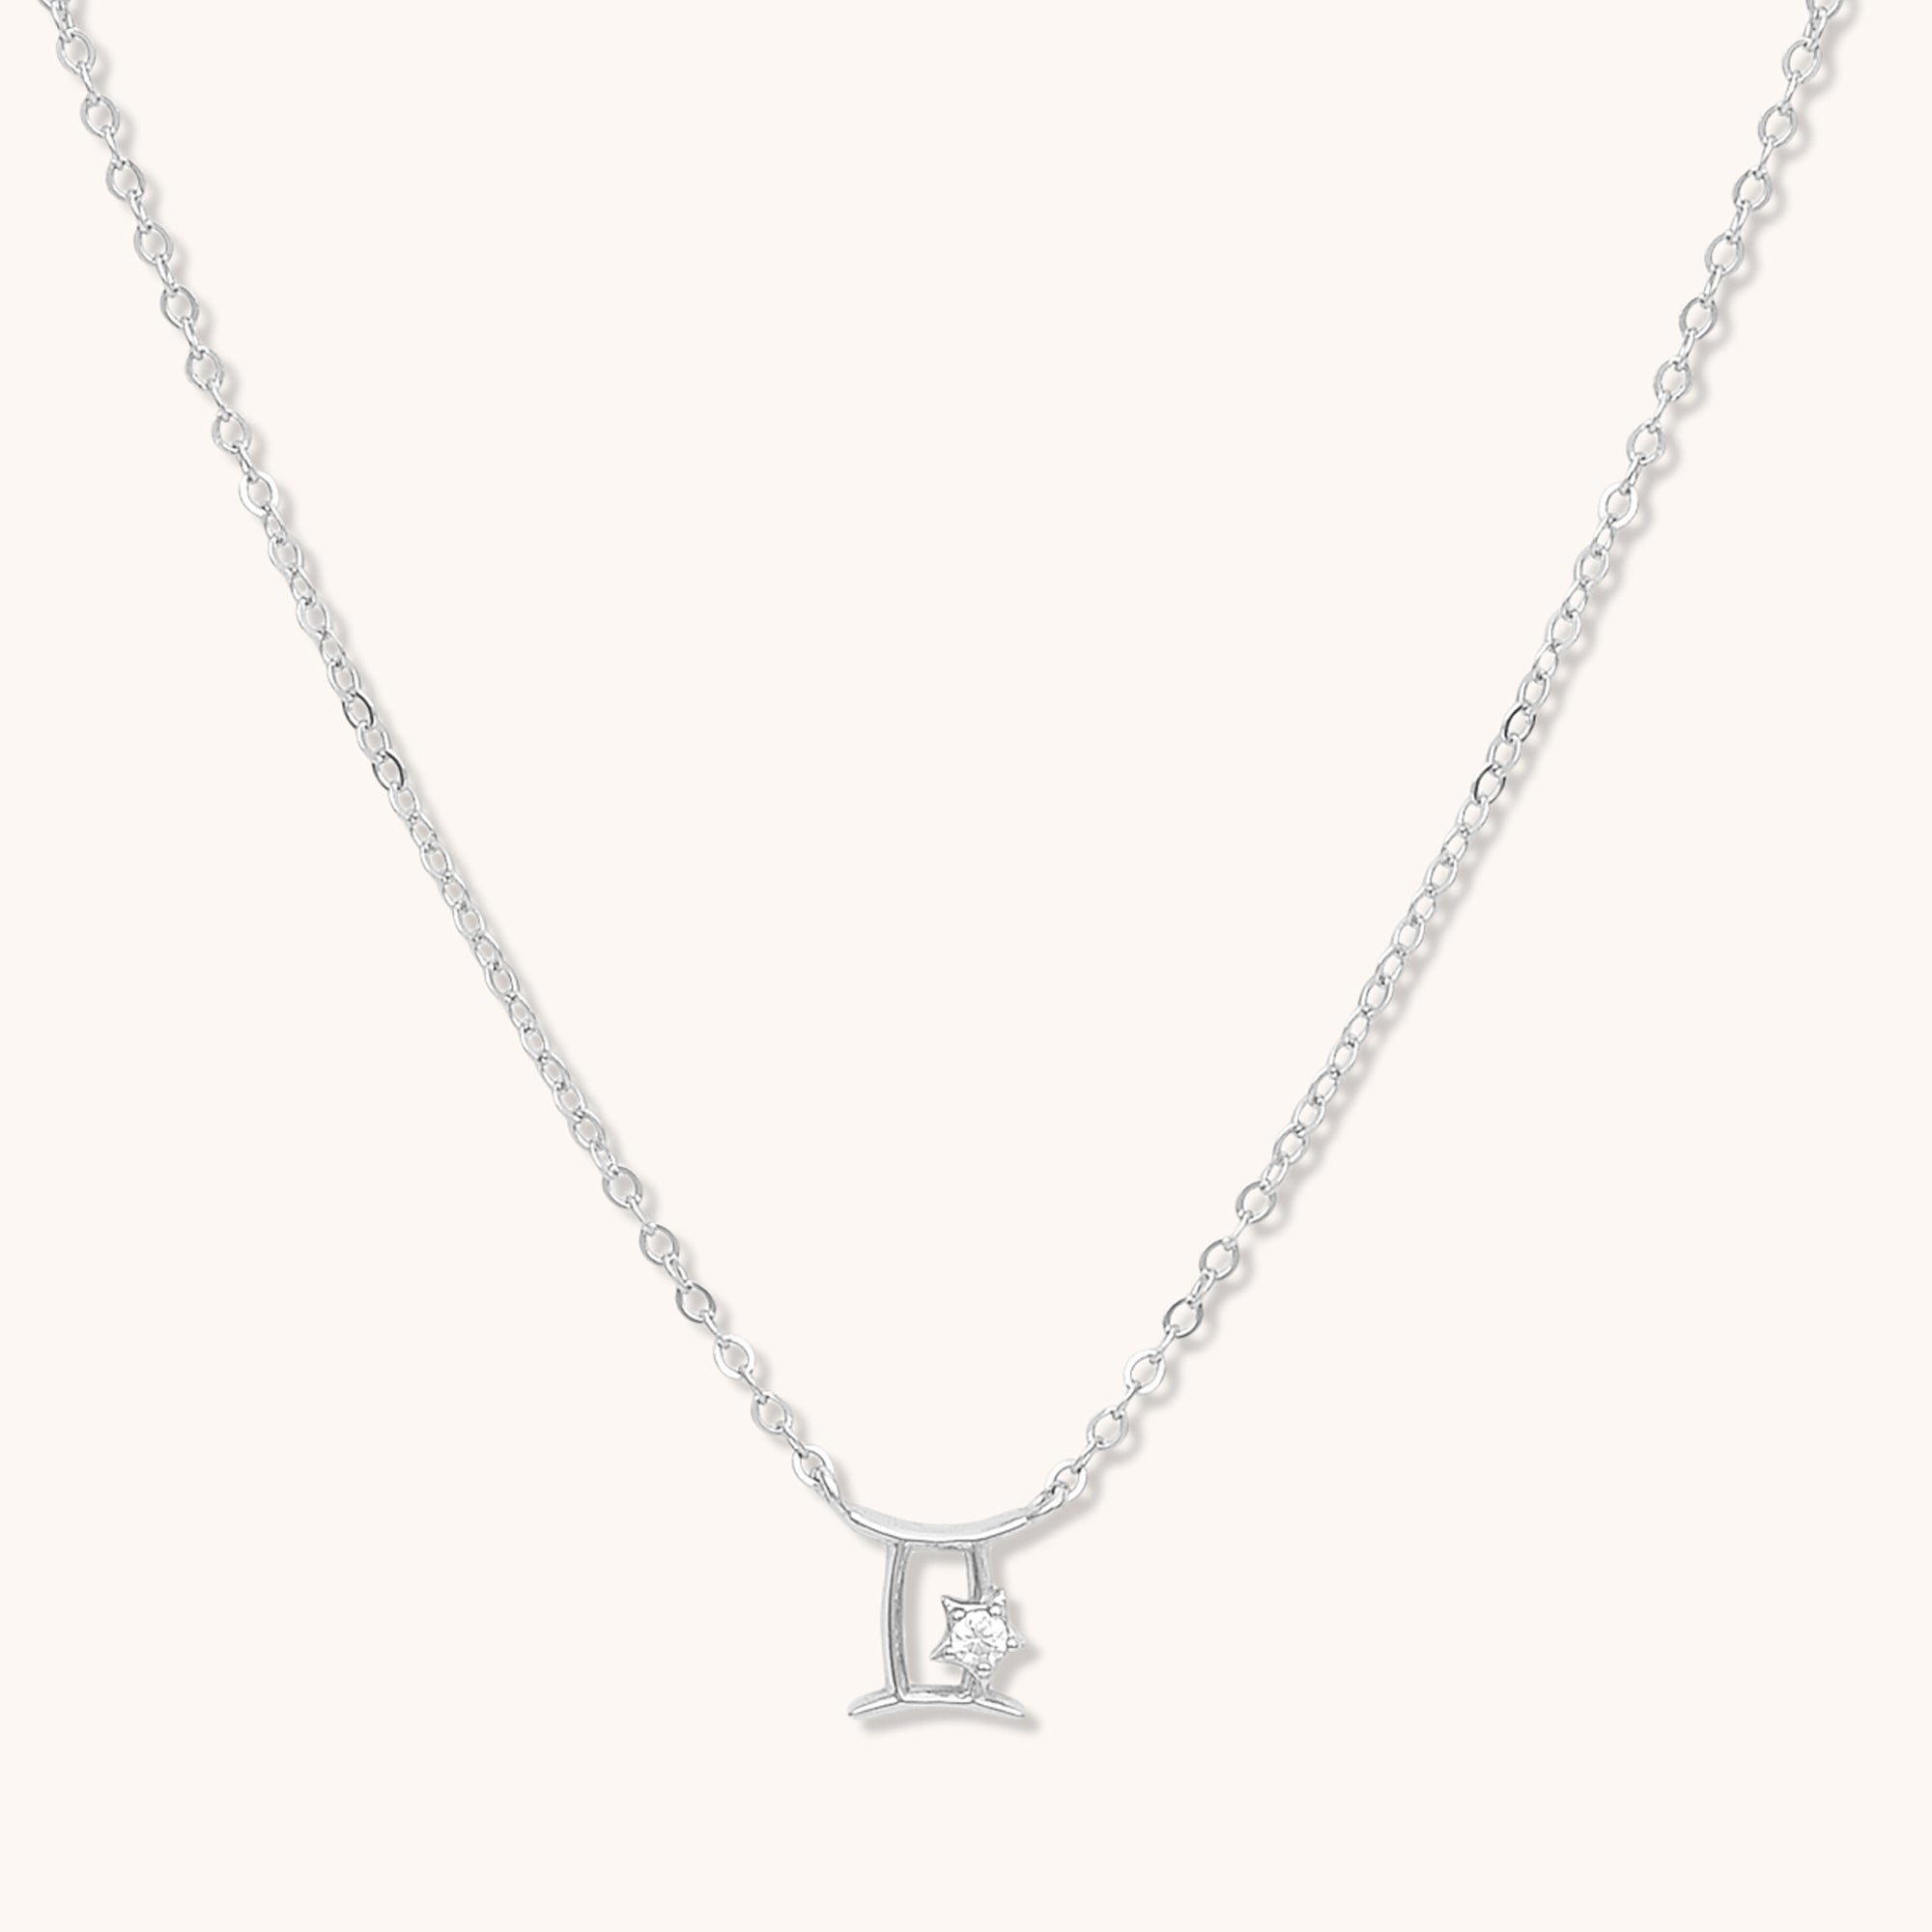 Gemini Star Sign Necklace Silver